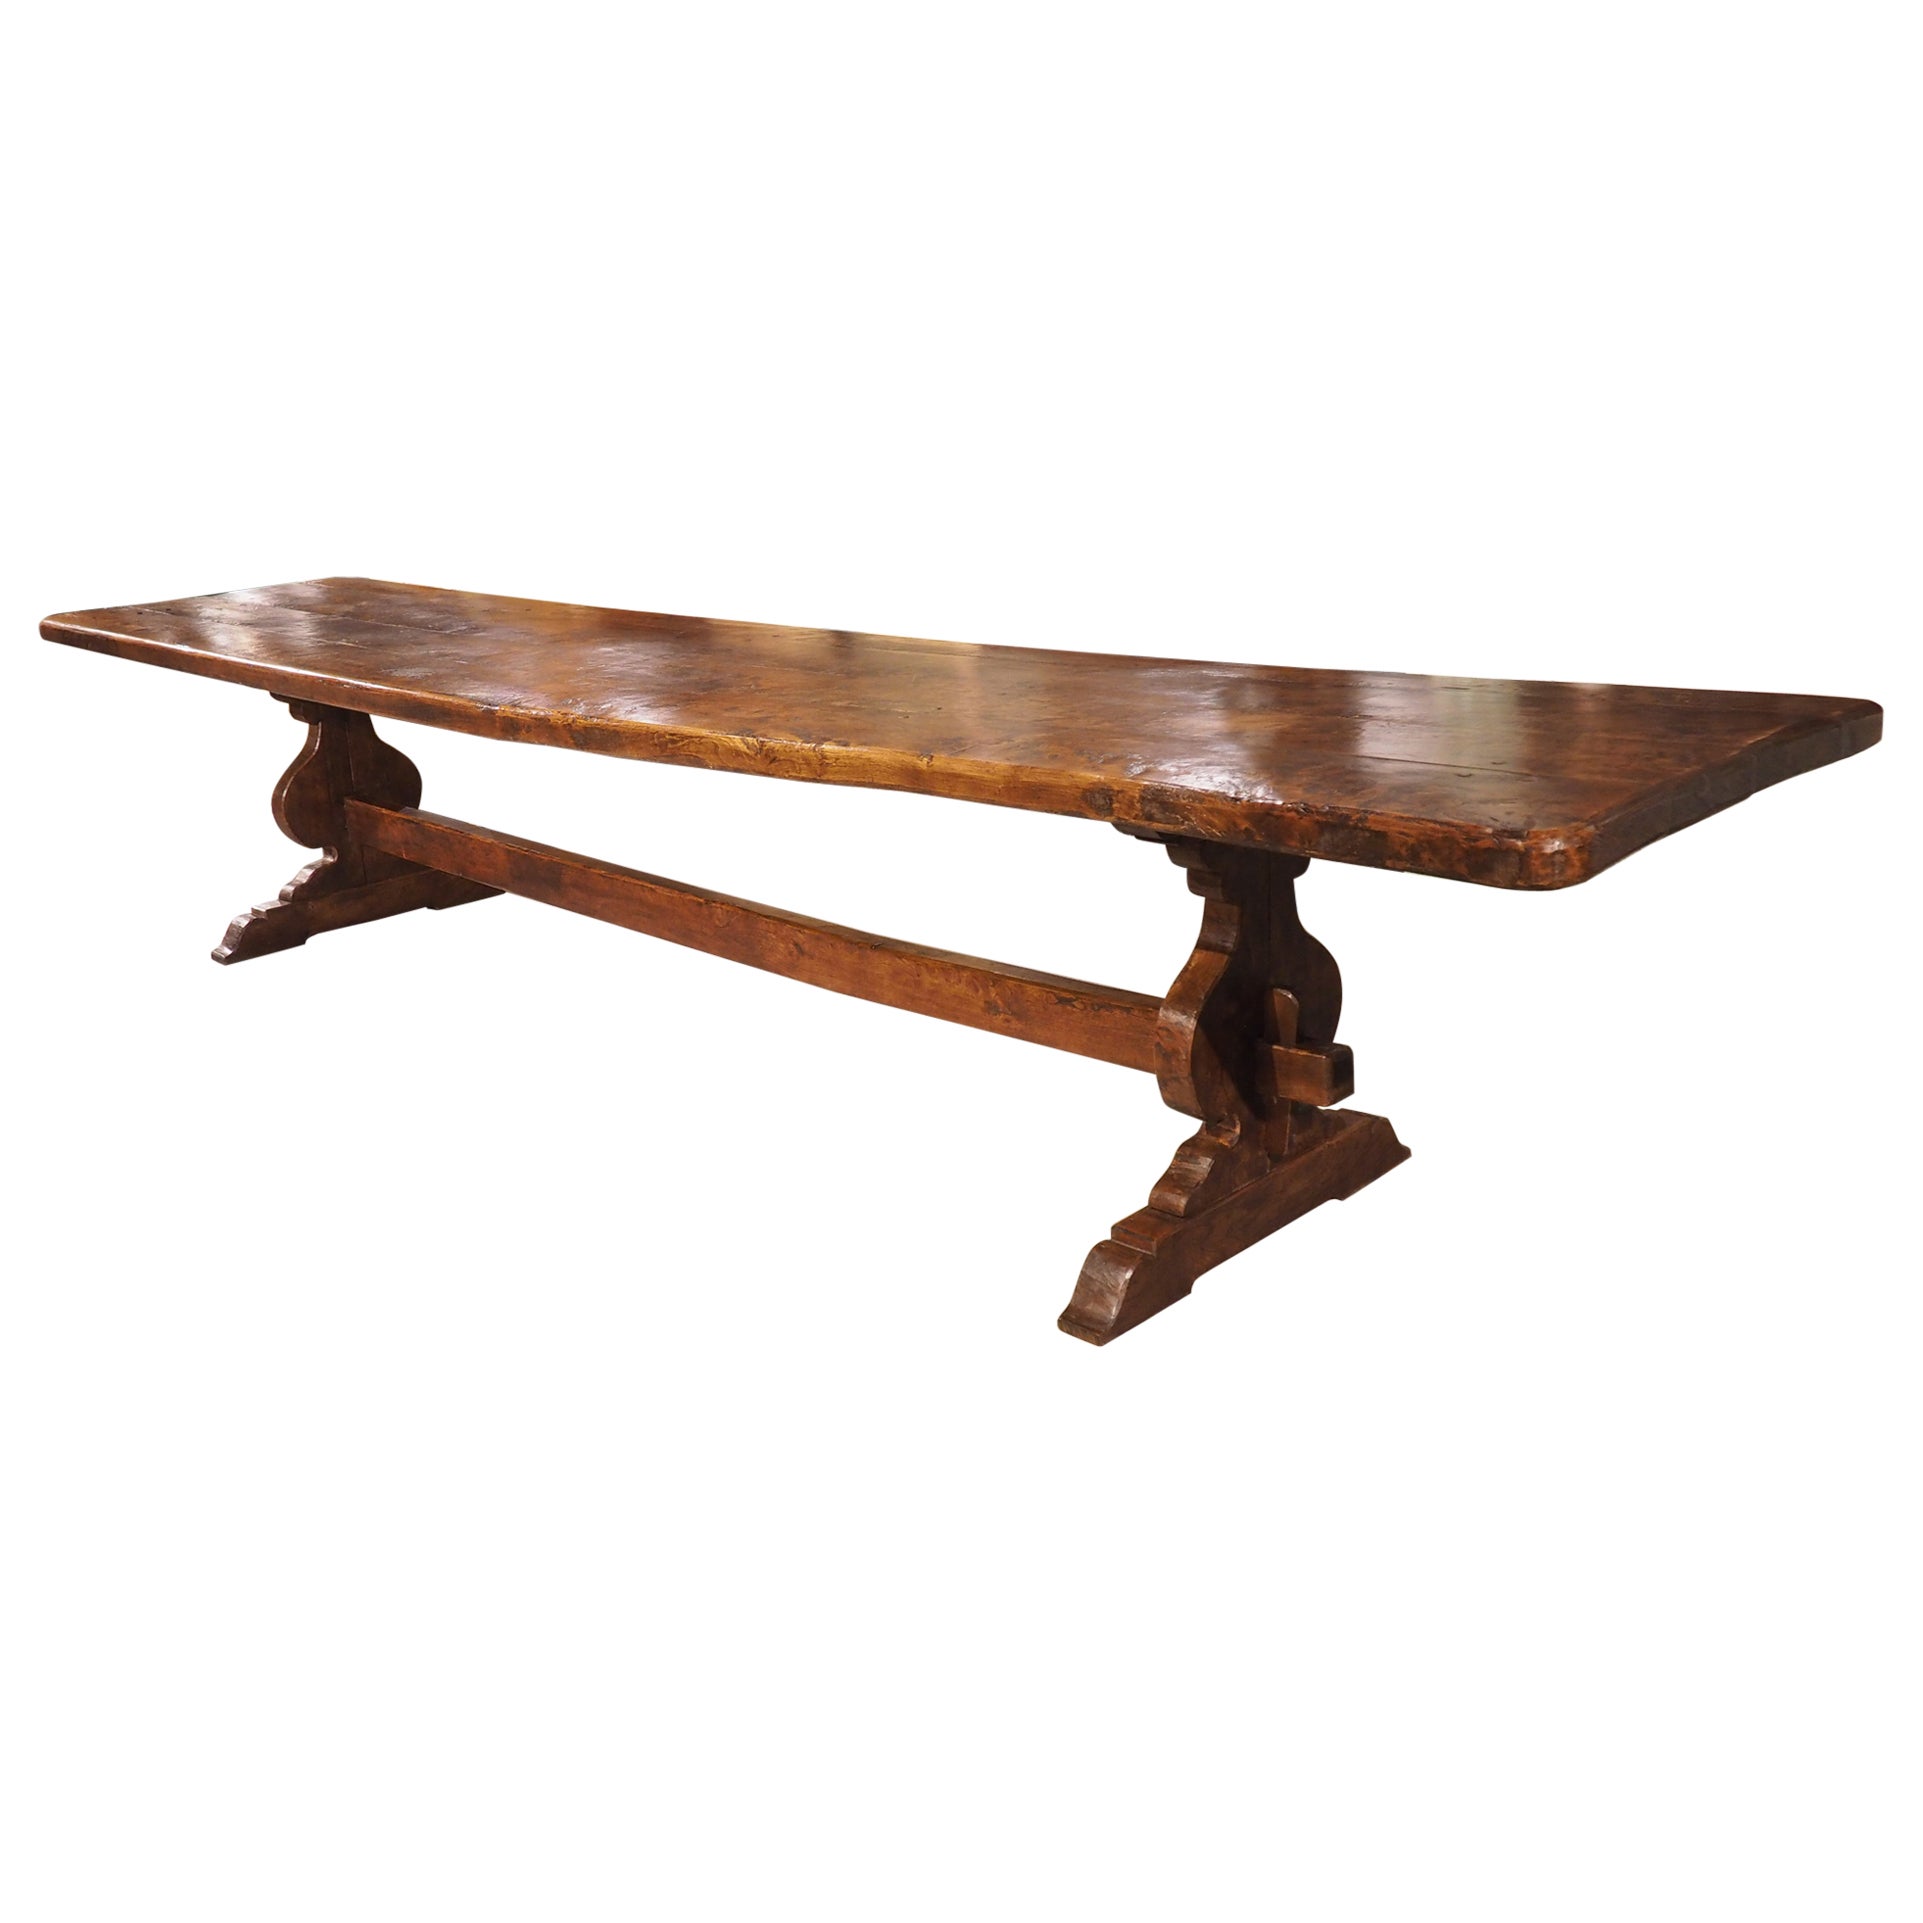 Antique Chestnut Dining Table from a Chateau, Coat Nizan, Brittany